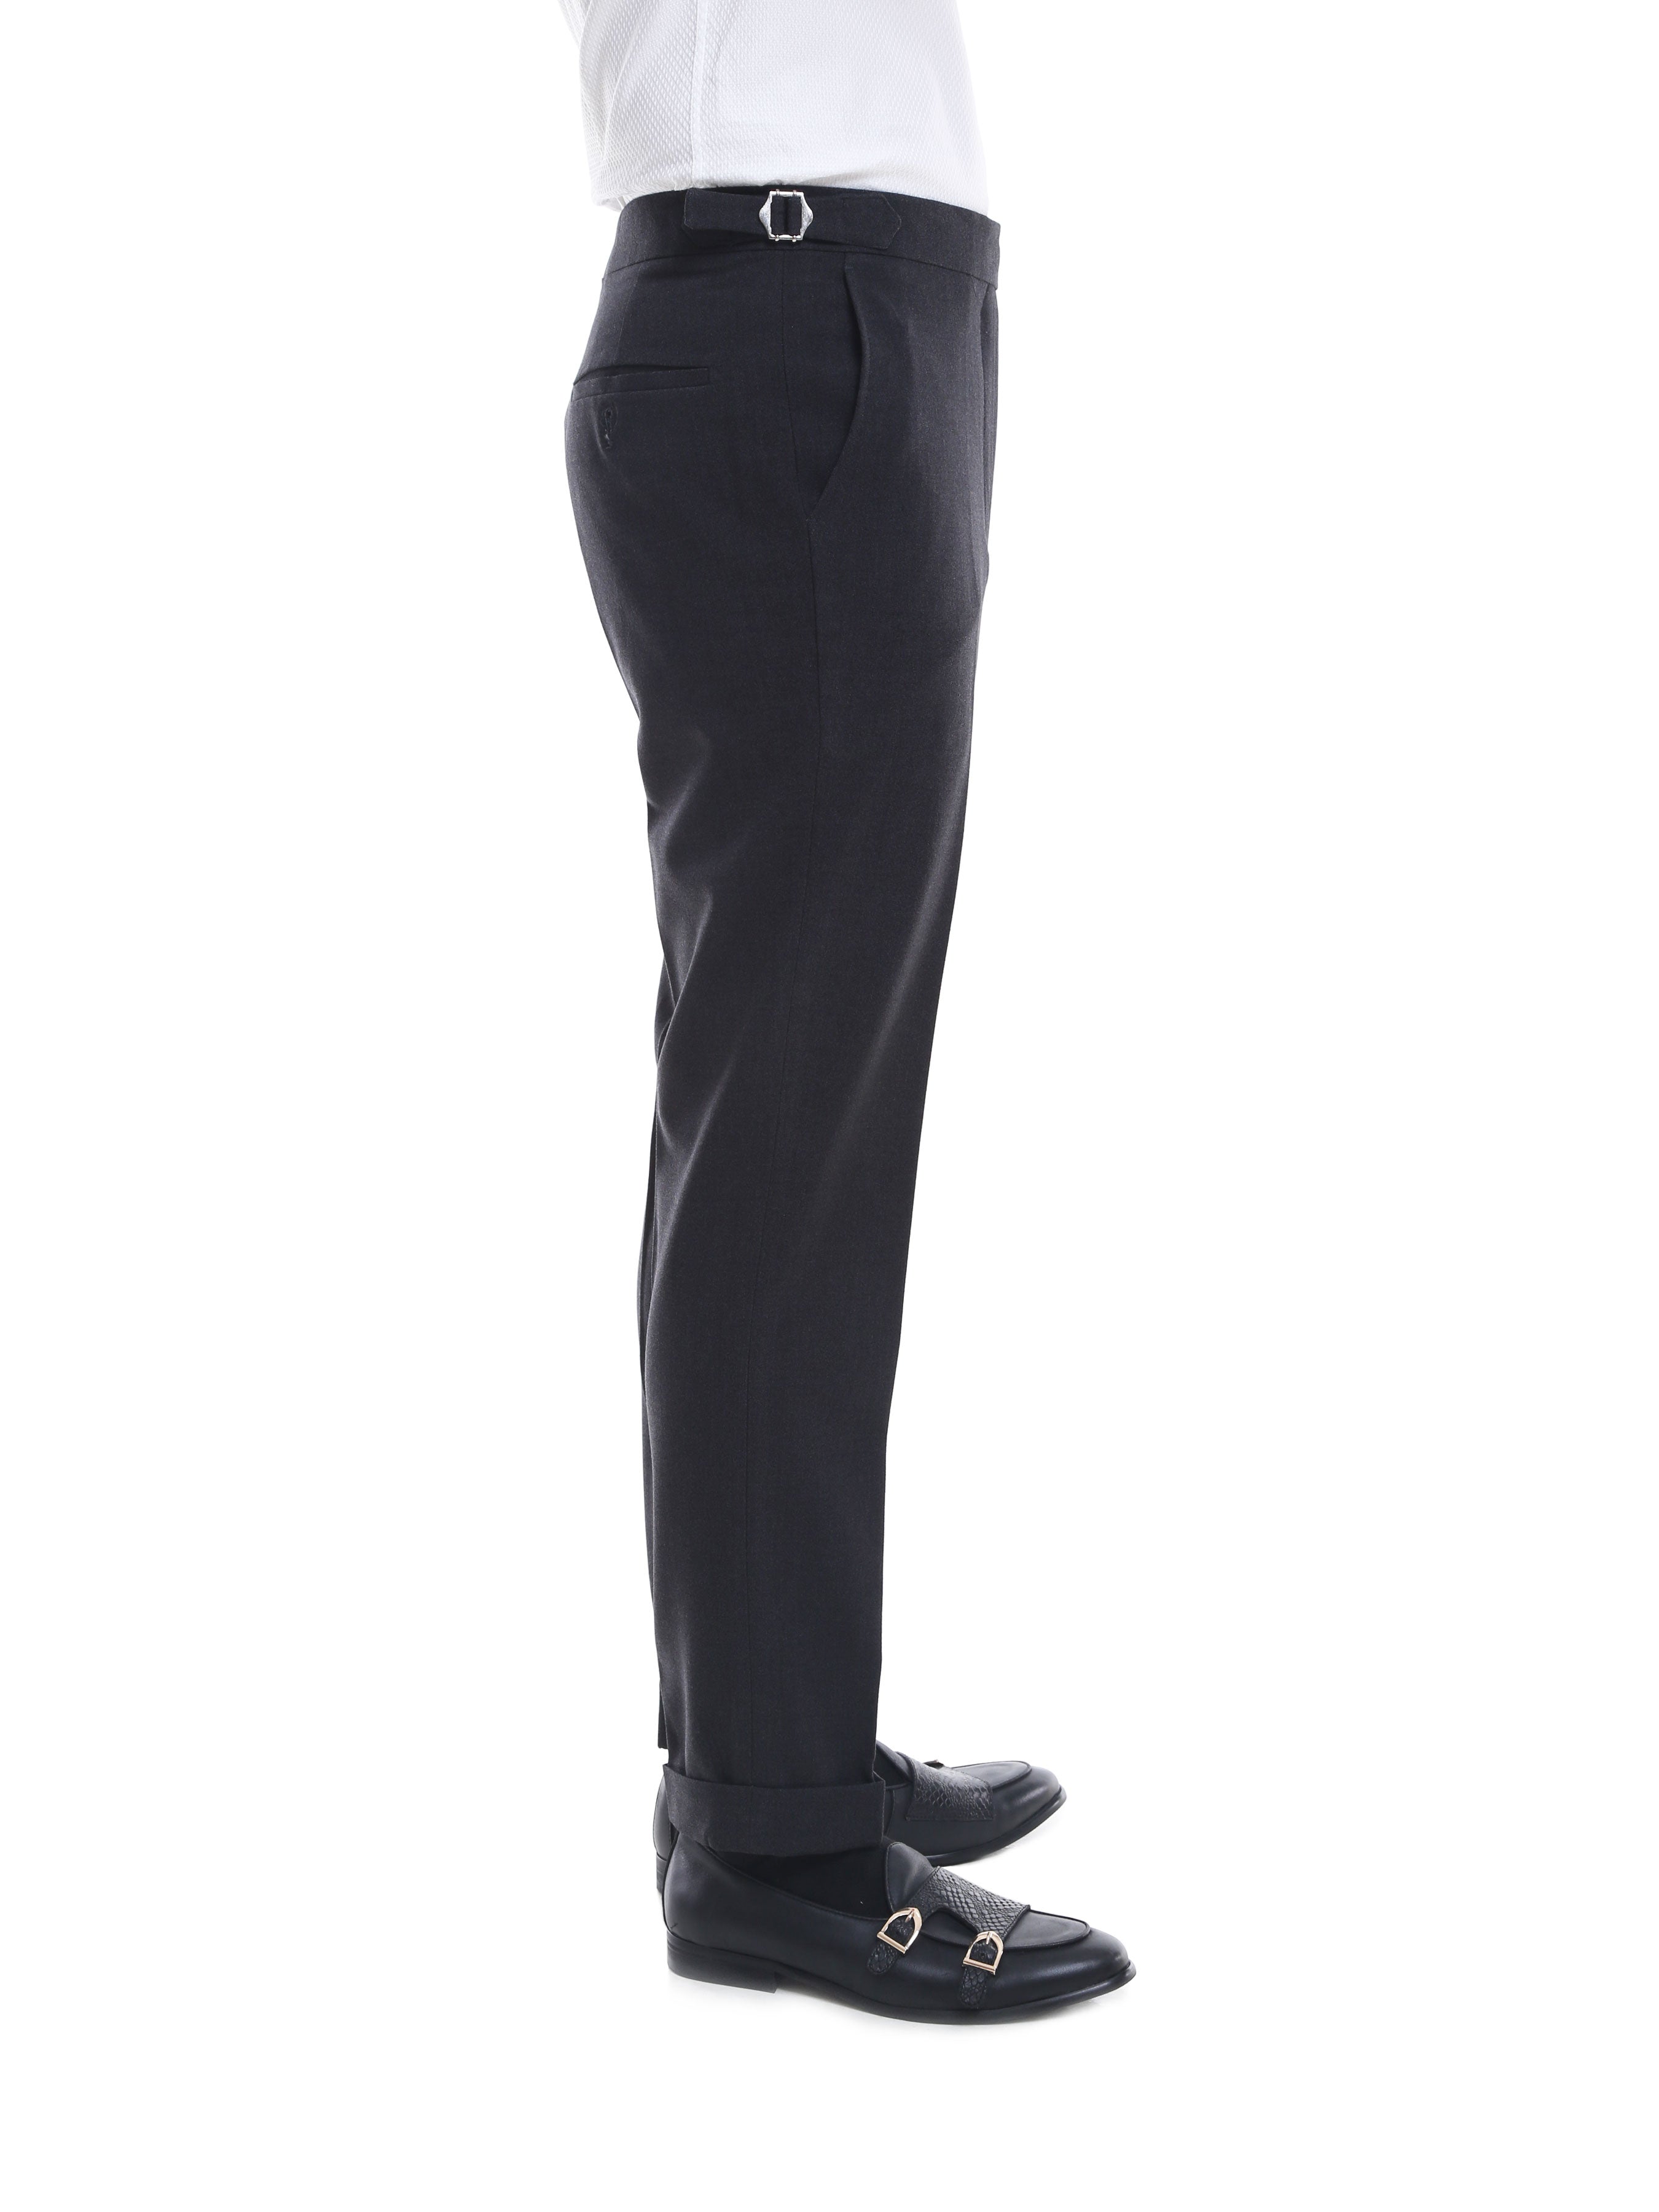 Trousers With Side Adjusters - Dark Grey Plain Cuffed (Stretchable) - Zeve Shoes